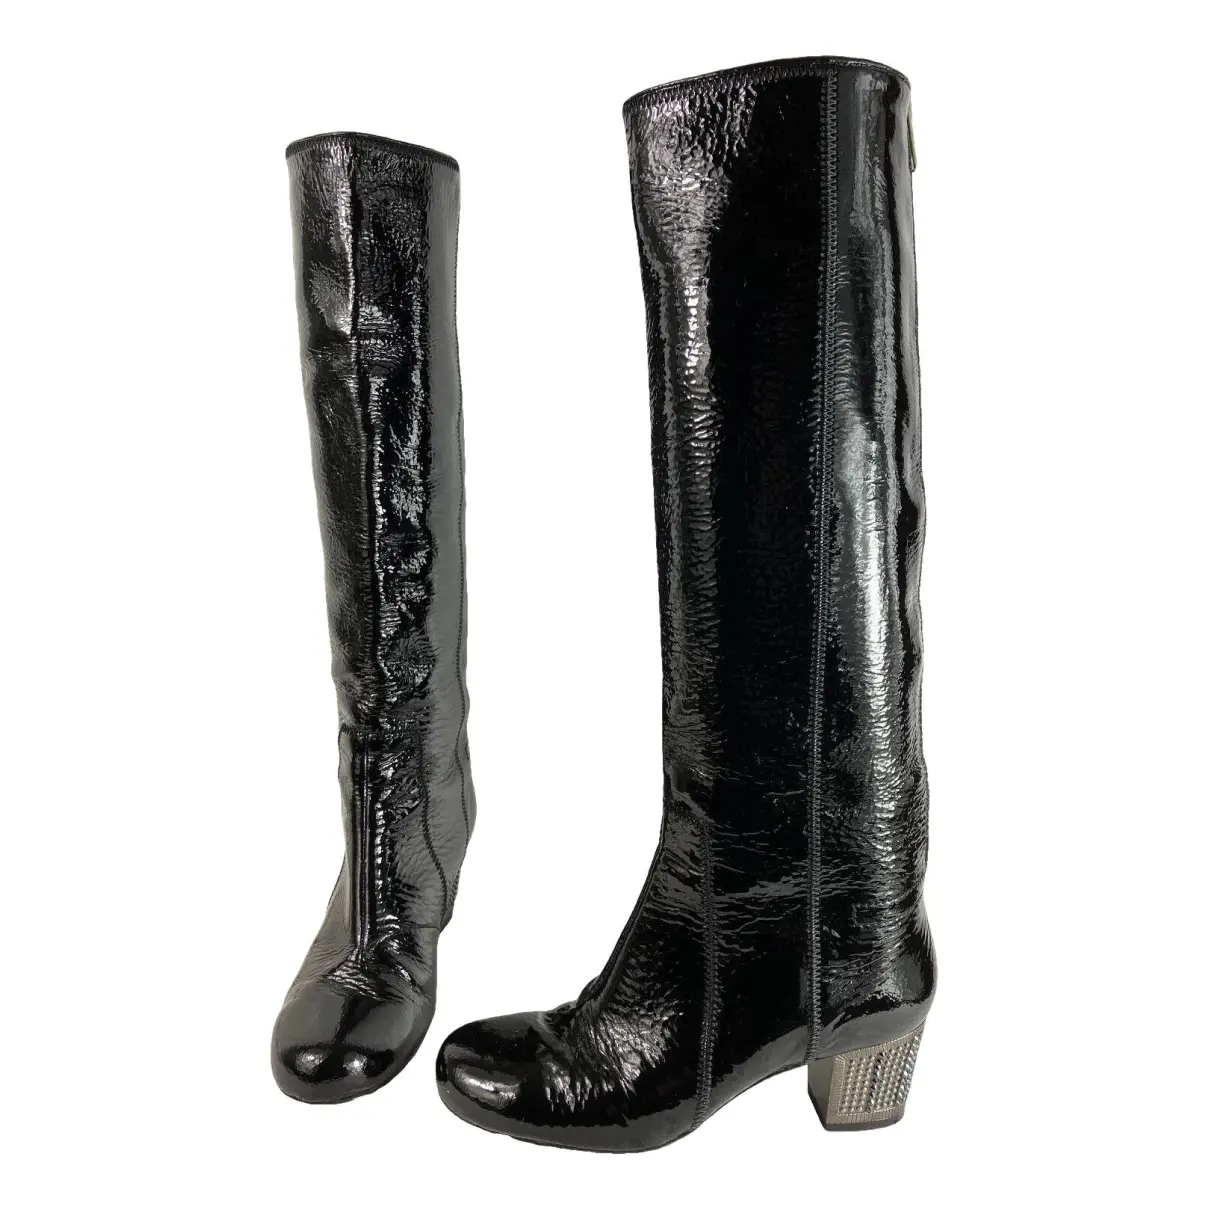 Patent leather riding boots